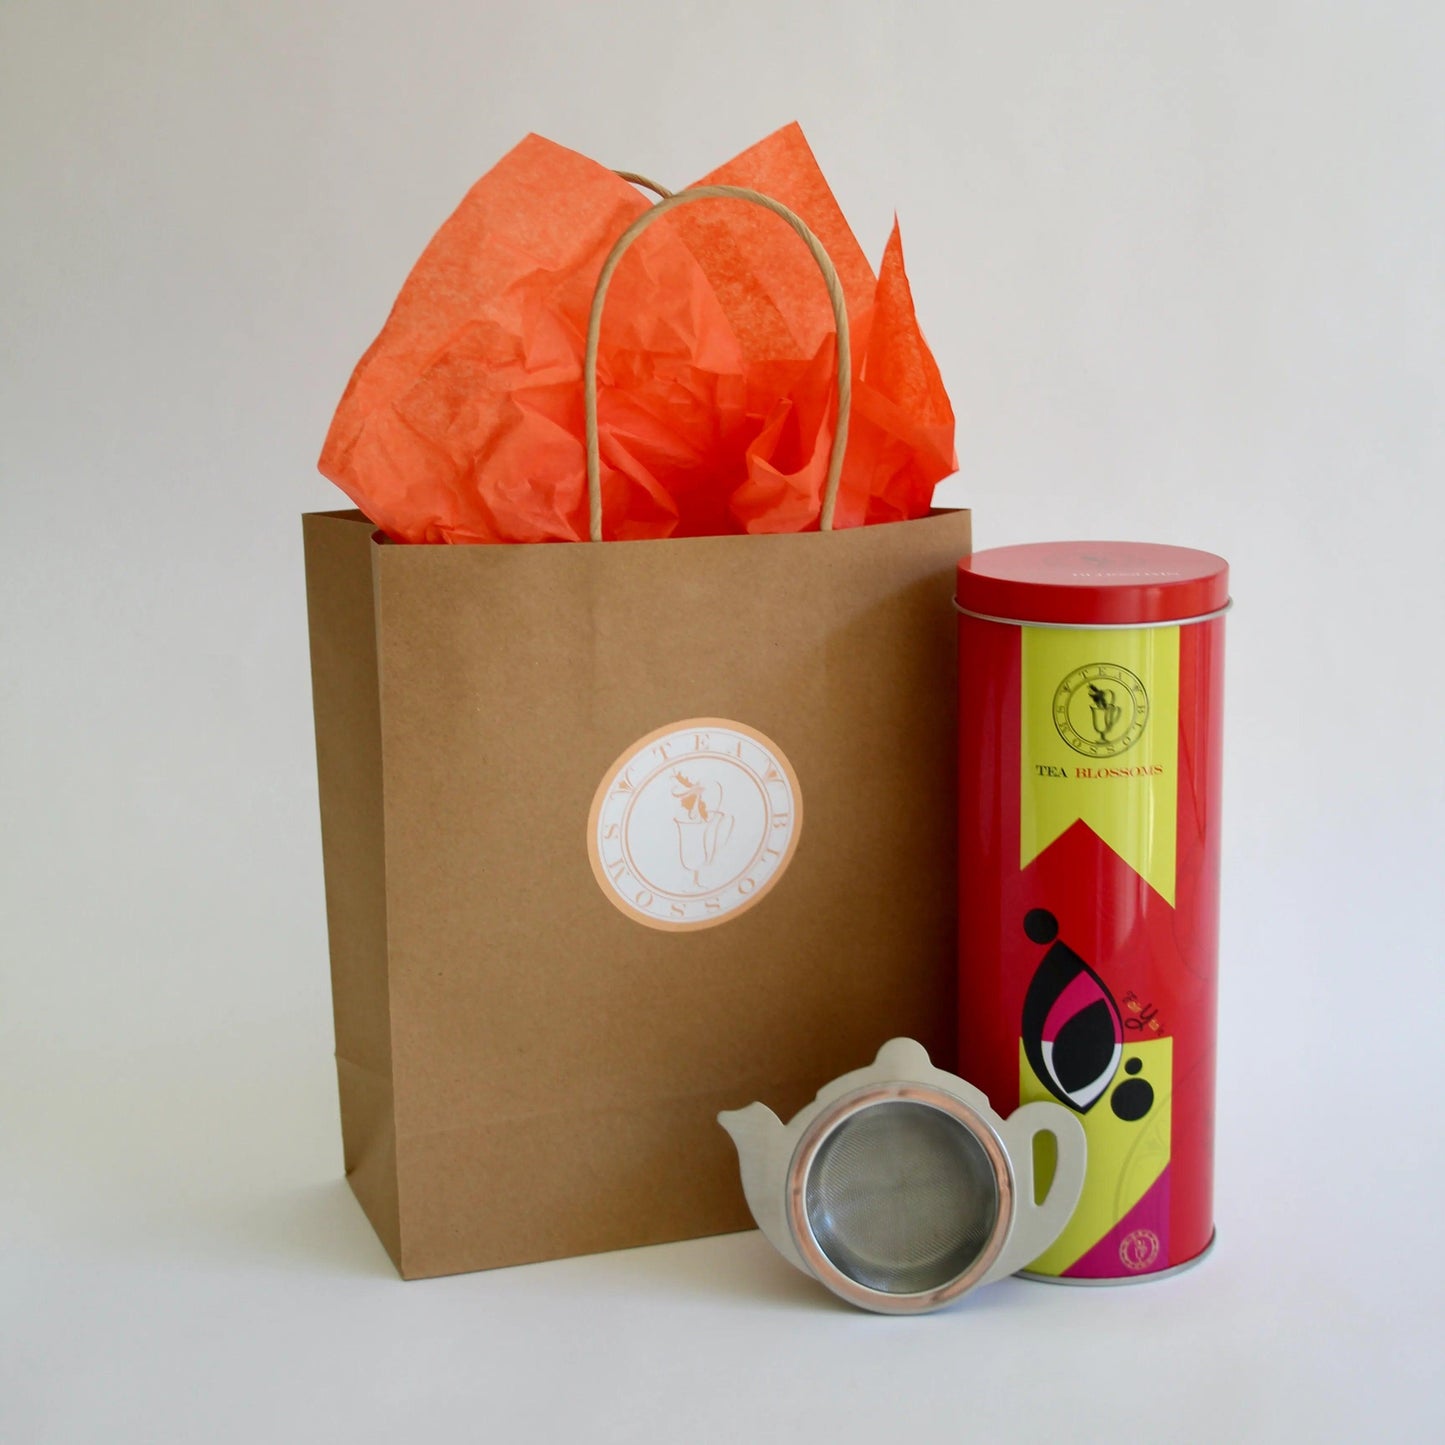 100g Loose Leaf Tea in a Gift Tin and with a Teapot-Shaped Tea Strainer